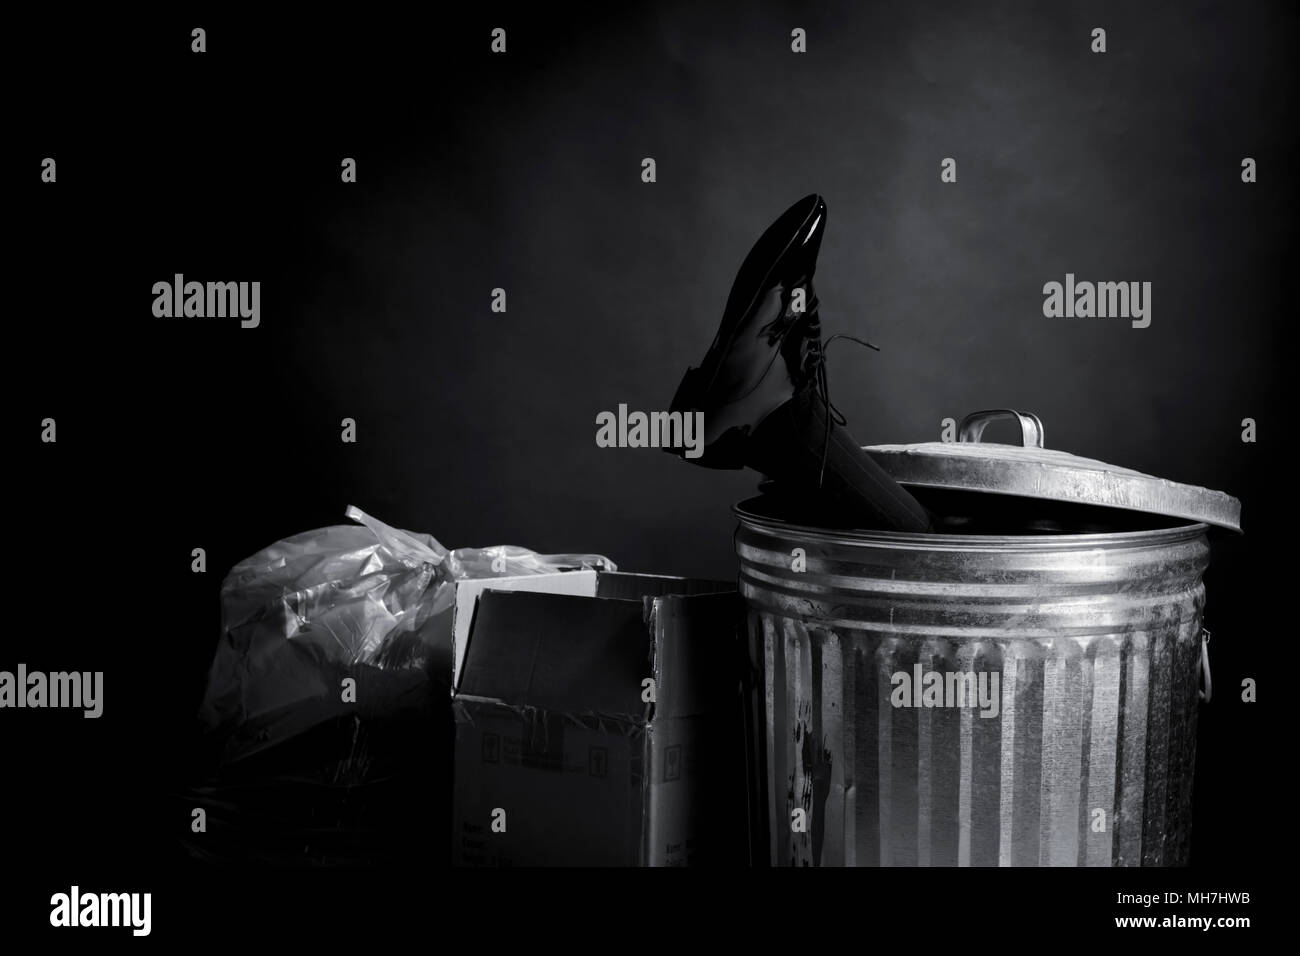 Foot of businessman with patent leather shoe sticking out of trash can Stock Photo